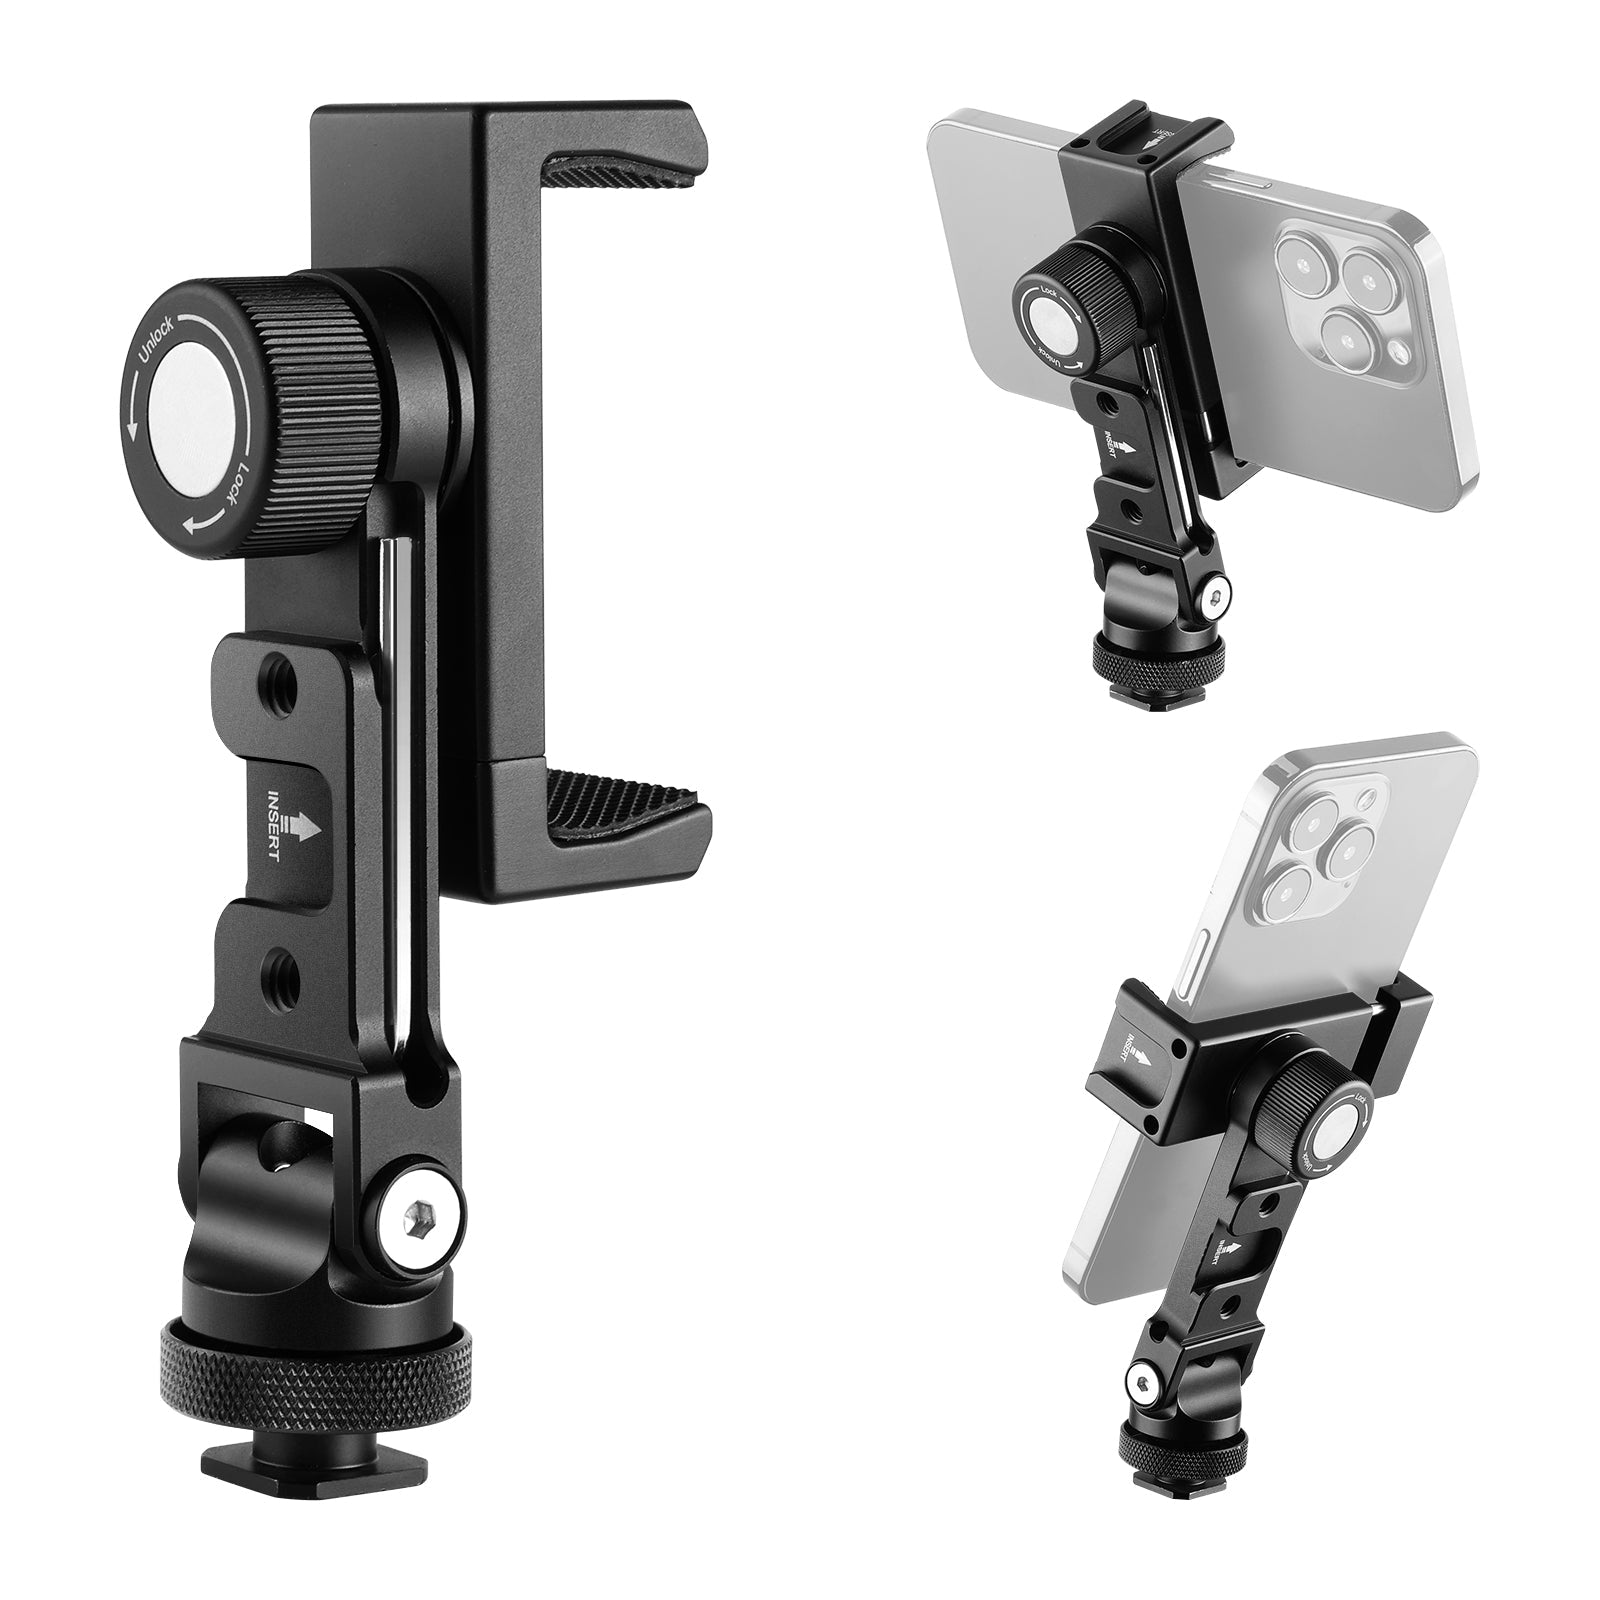 Bower Mobile Top Grip Tripod with Cold Shoe Mount and 360 Degree Smartphone  Holder, also compatible with LED lights, flashes & microphones, Black